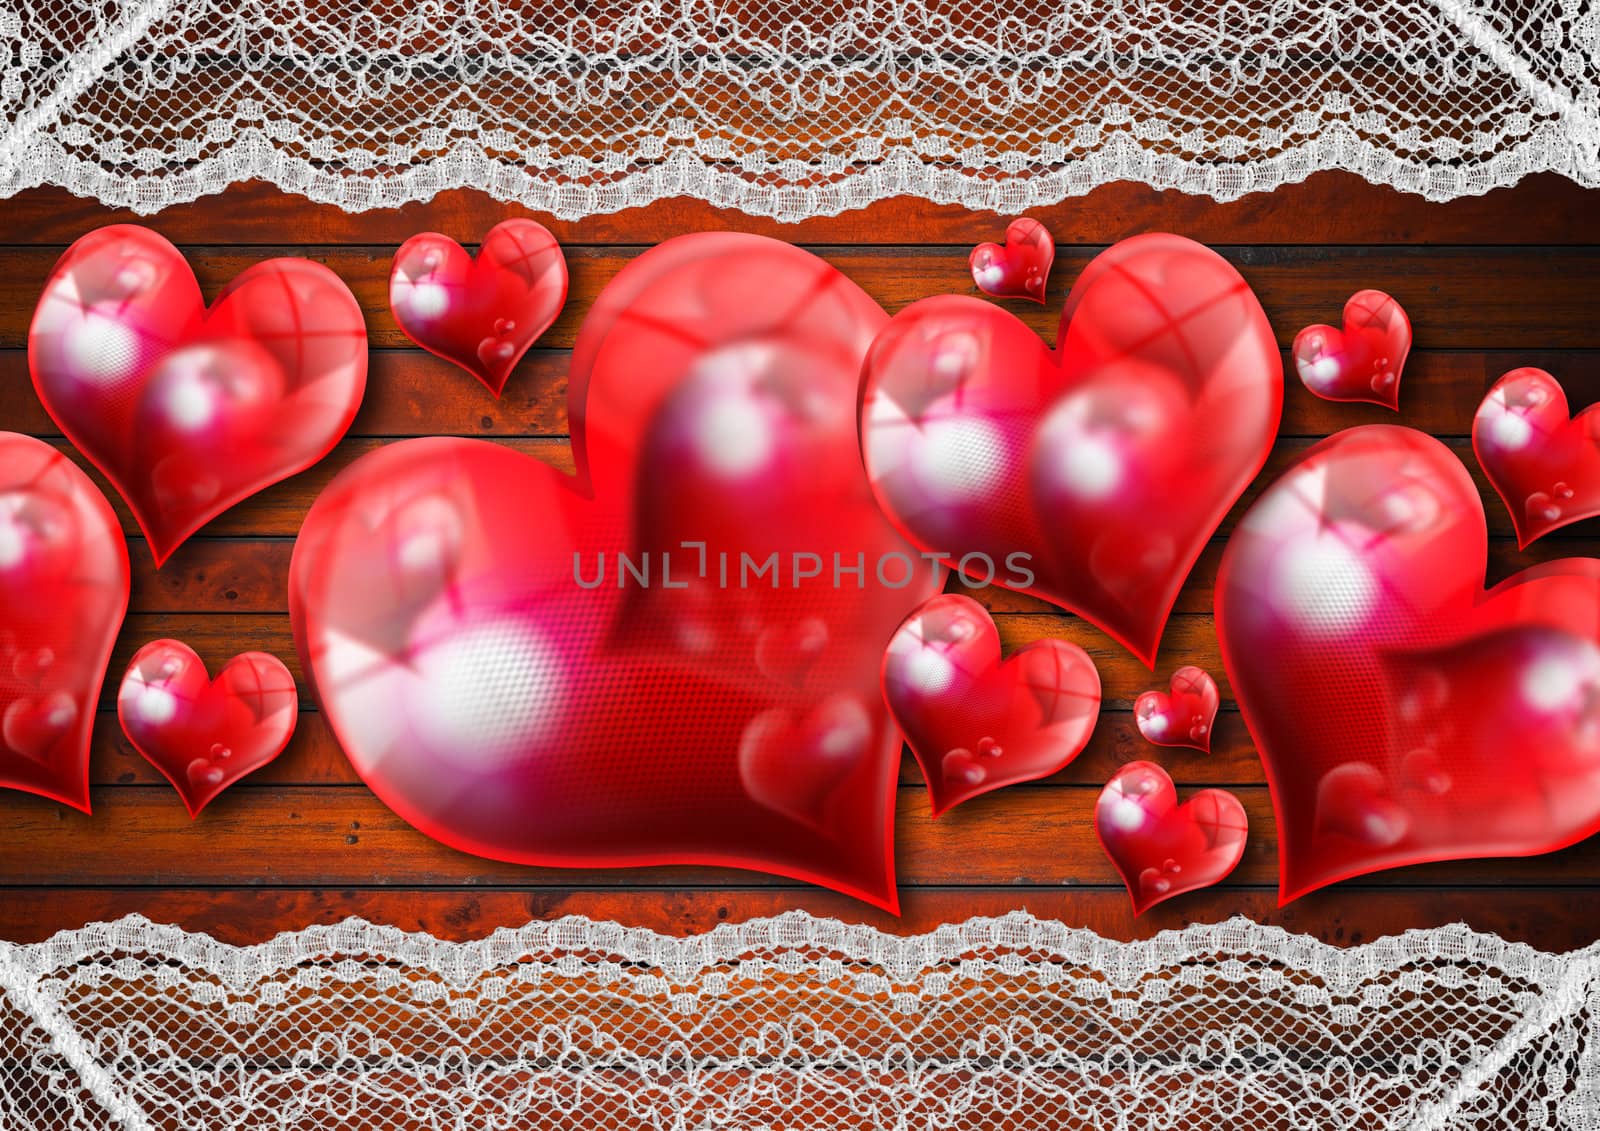 Romantic vintage background with red hearts and handmade lace

